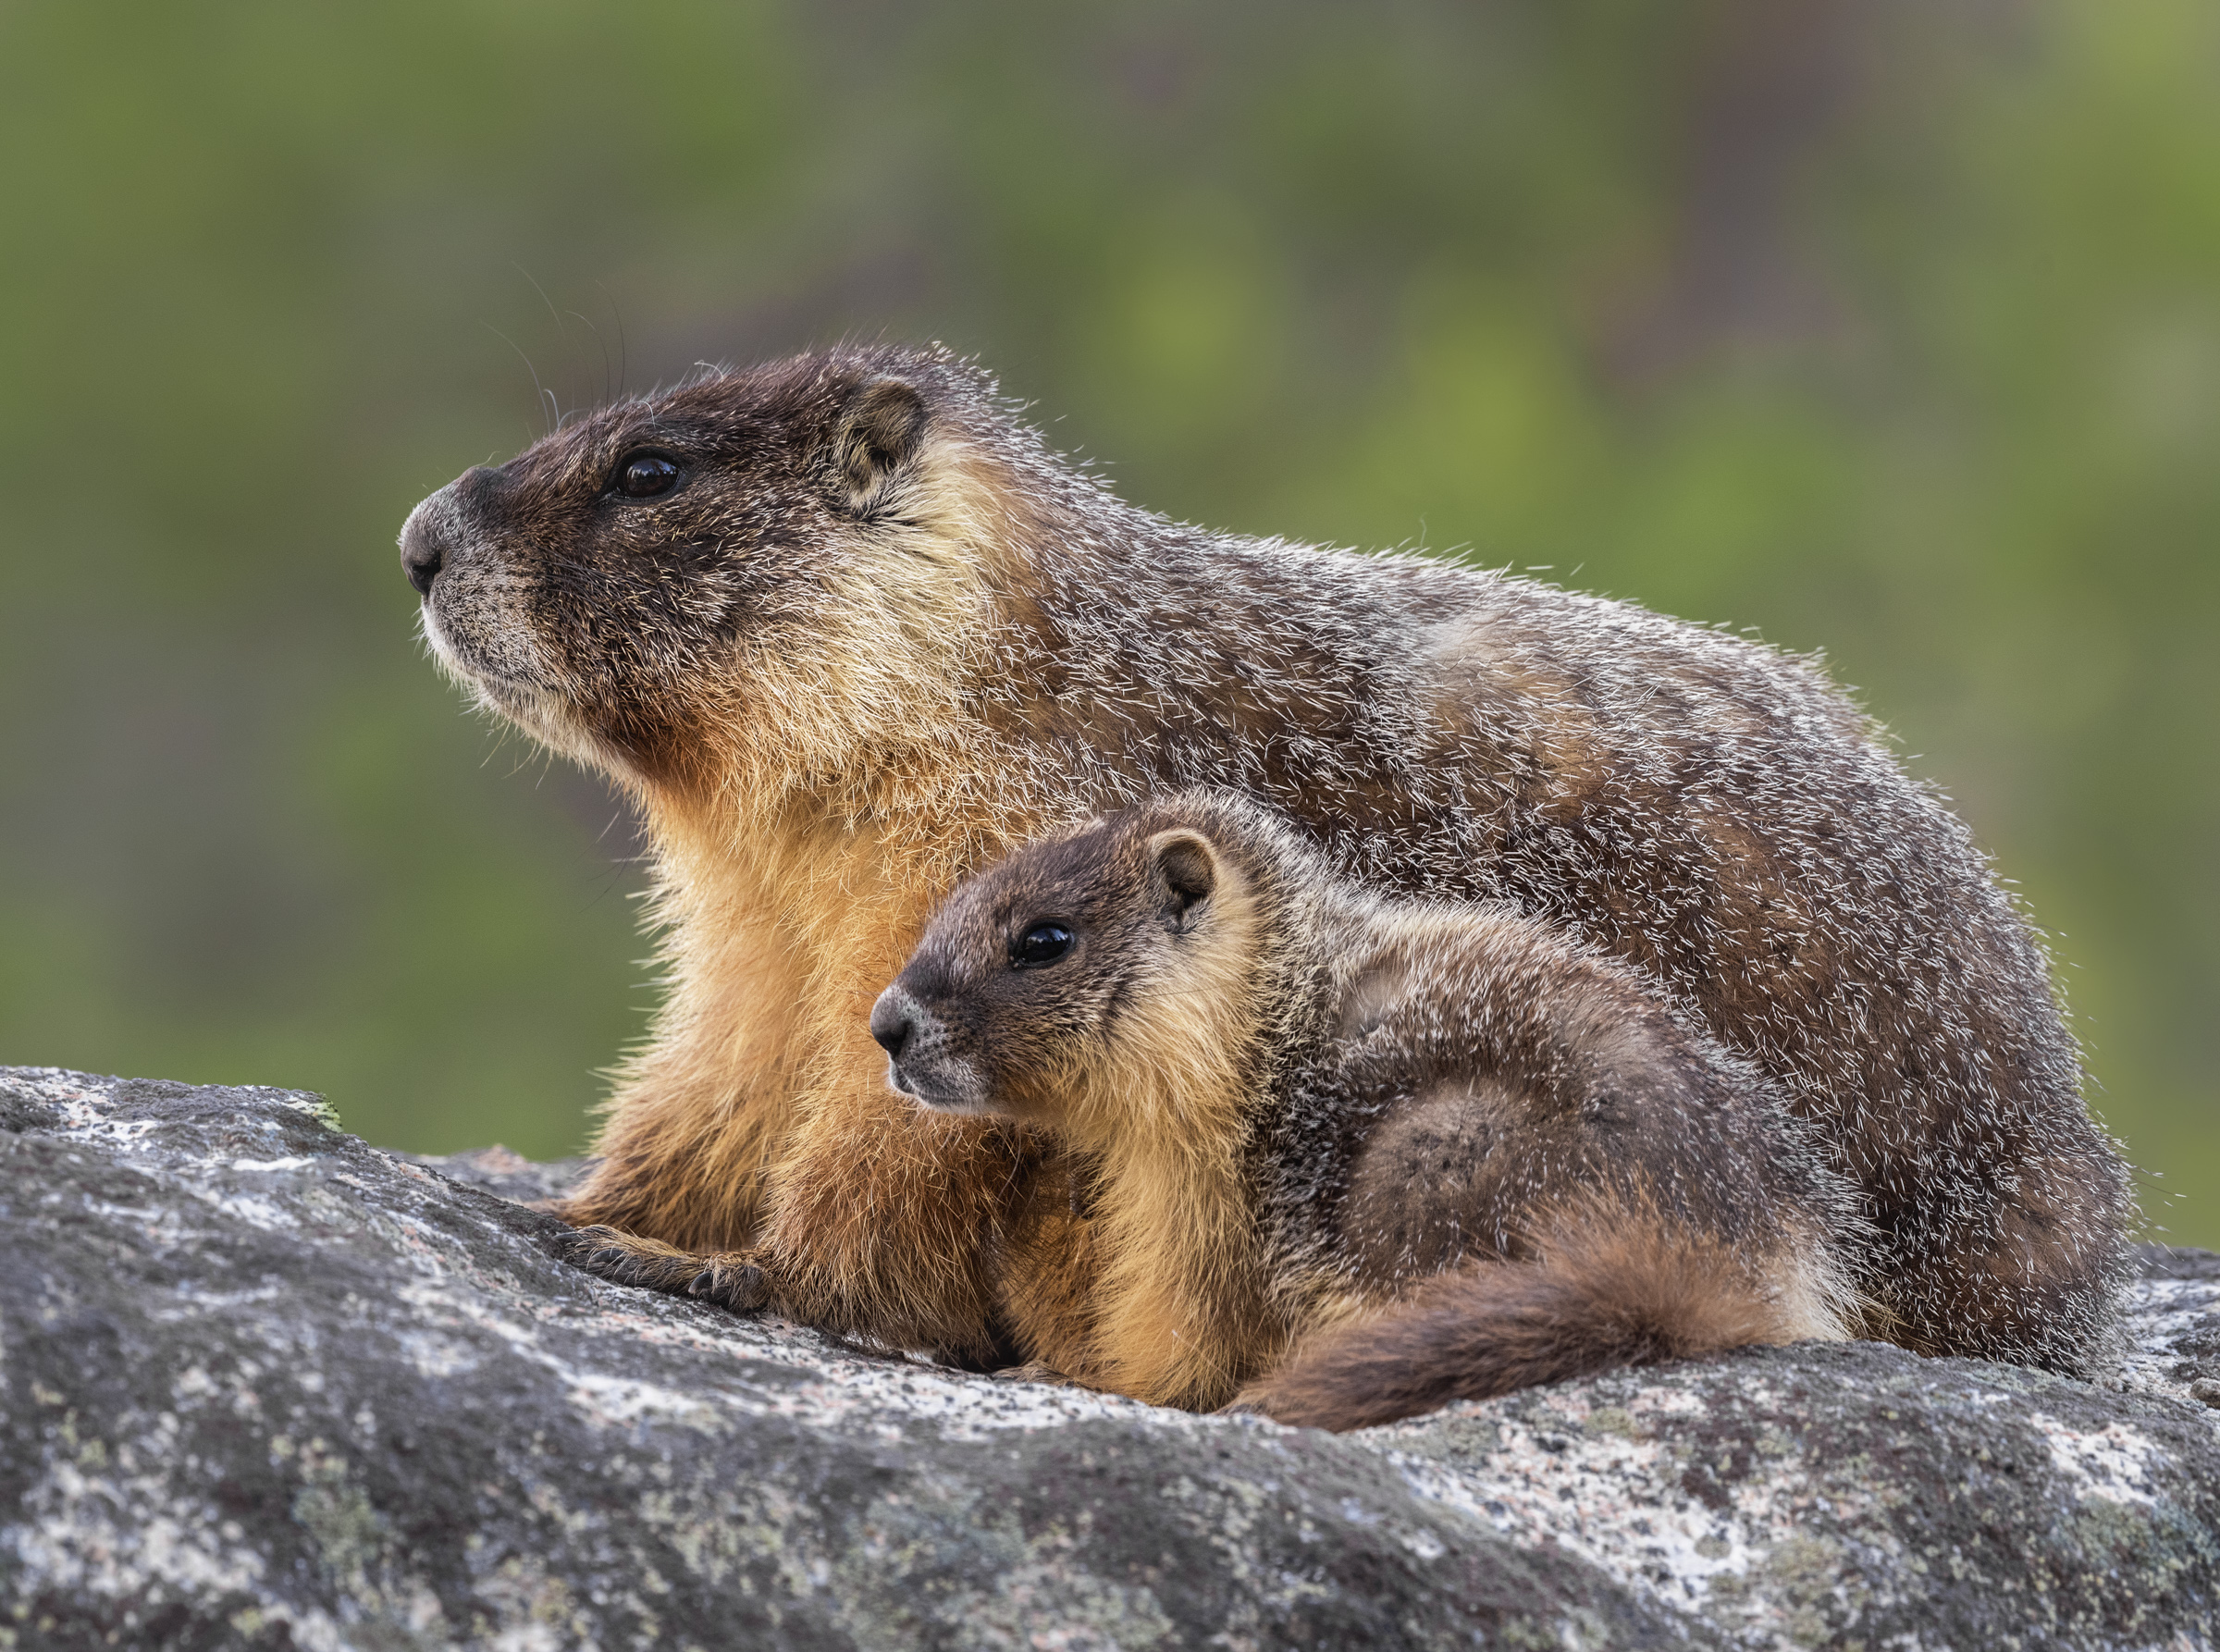 Here is one of the cutest things I've ever seen -  marmot and her baby in Yosemite. This mother marmot had 4 babies that sh...